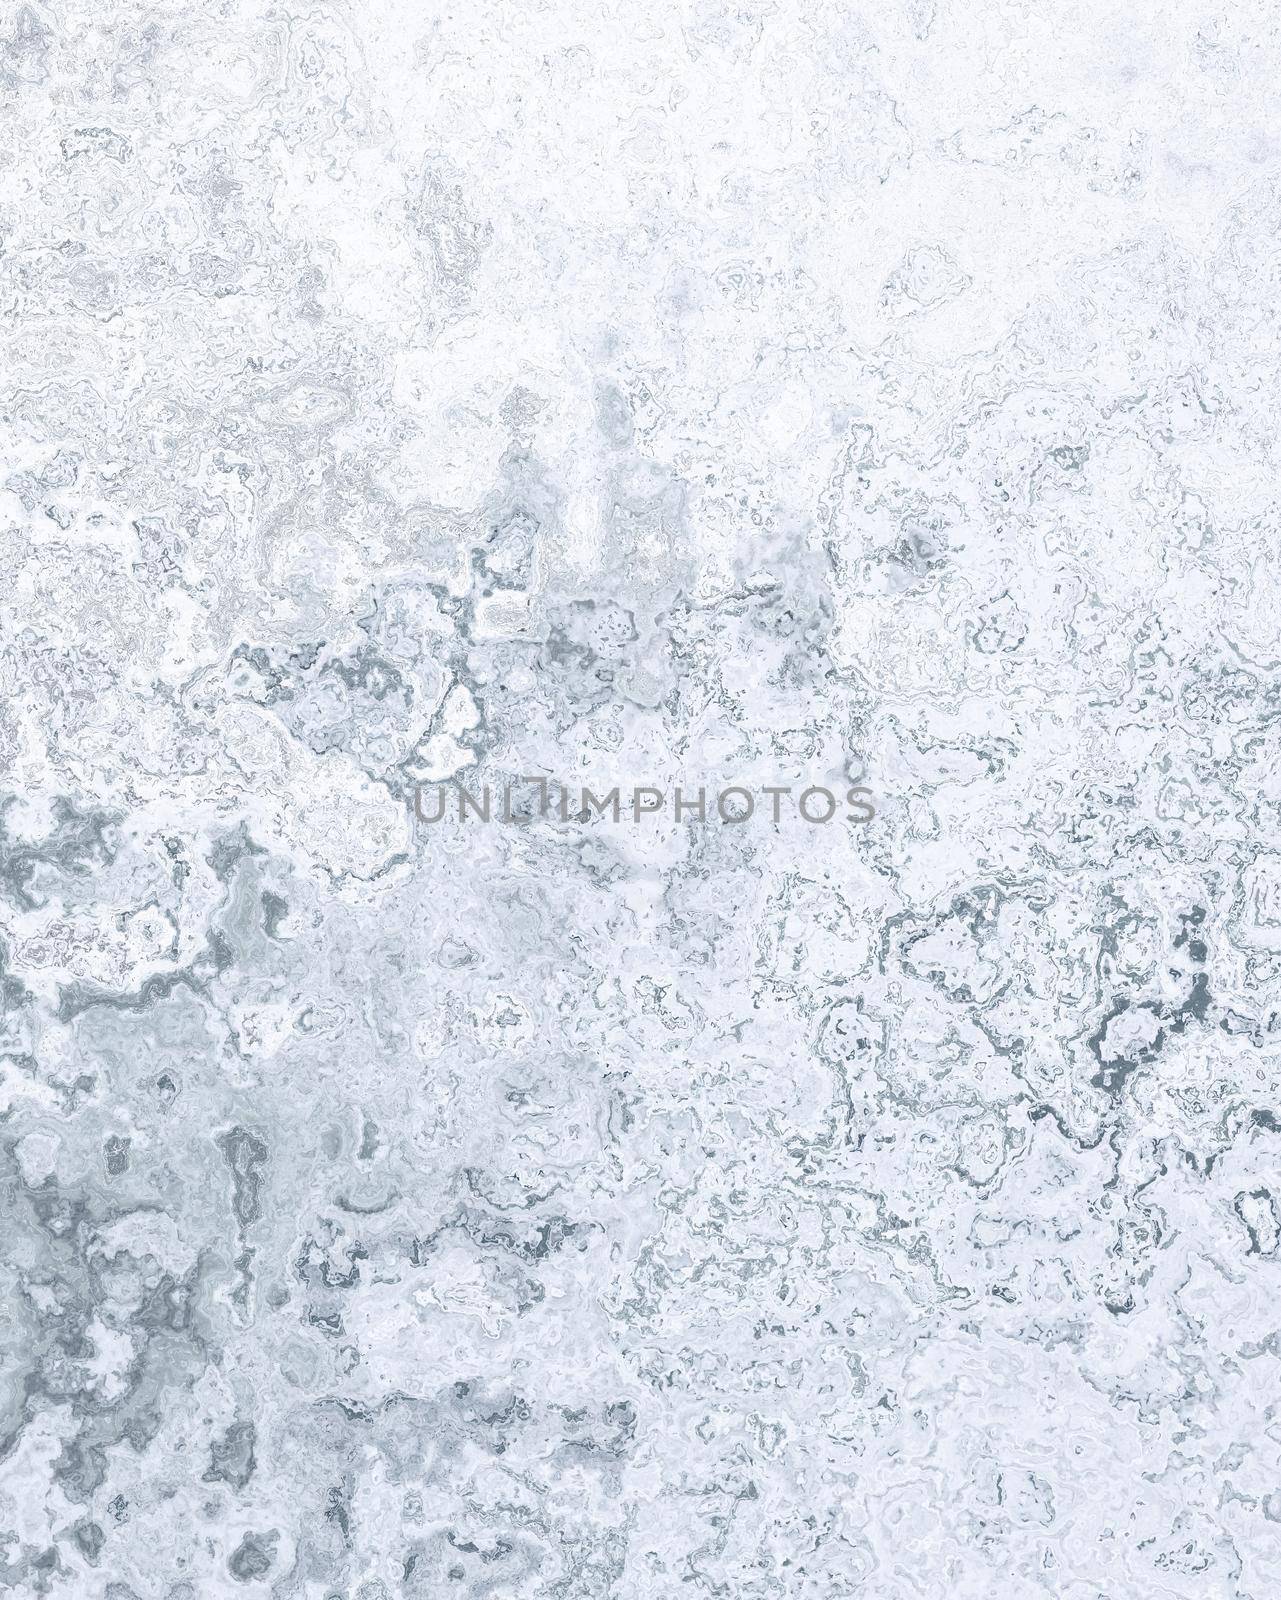 Grey bluish wavy textured layout on solid sheet of wallpaper. Concept of home decor and interior designing